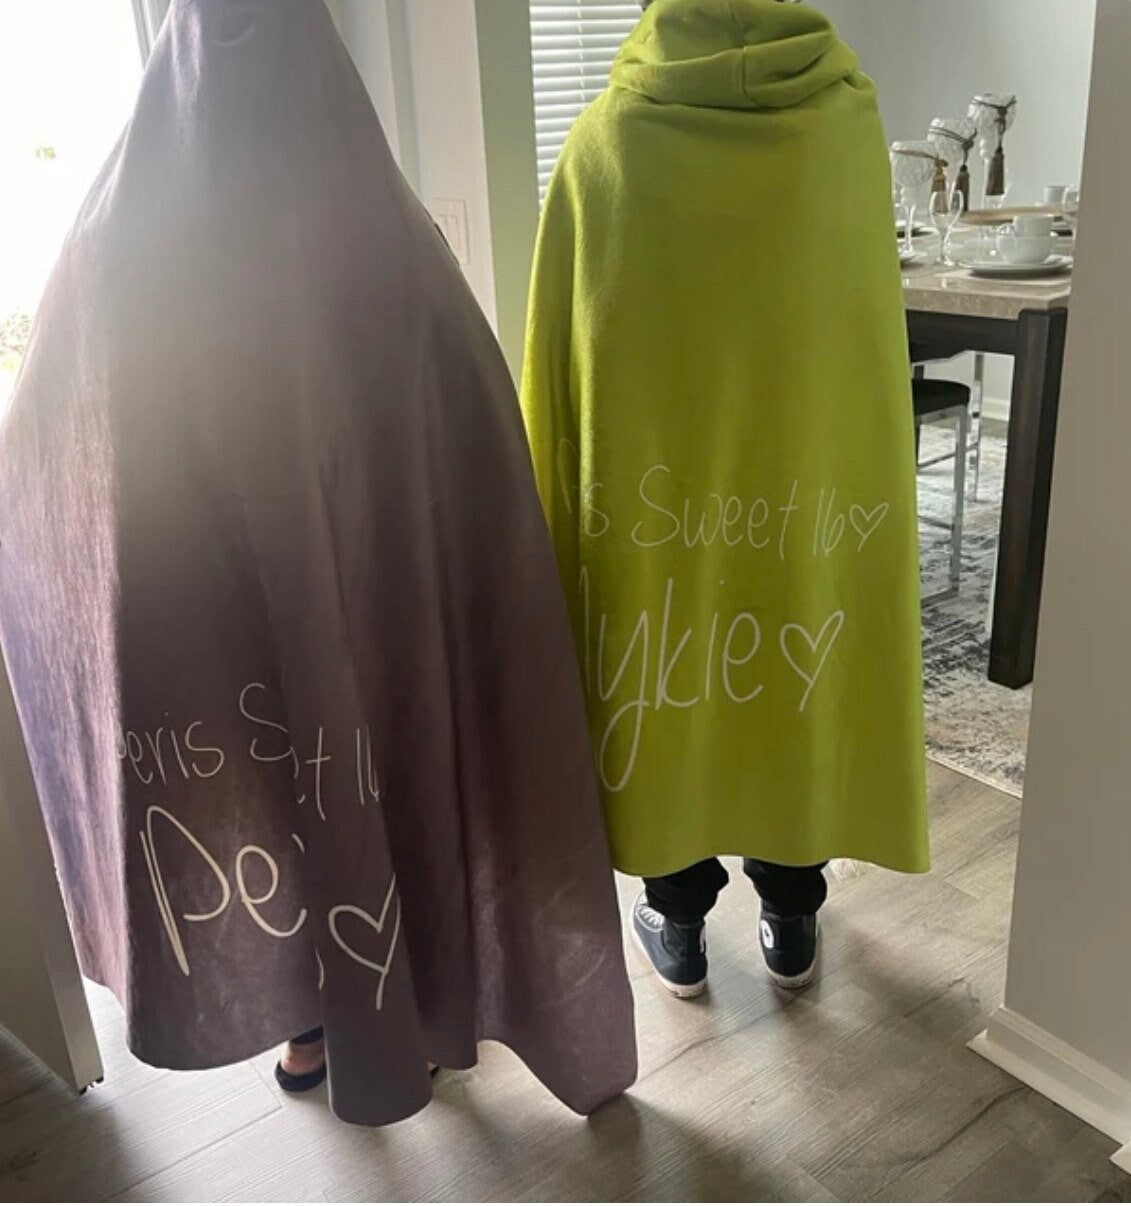 Personalize Hoodie blanket, Mommy &  Me size, Sherpa custom Hoodie blanket, Baby Hoodie blanket, birthday gift idea